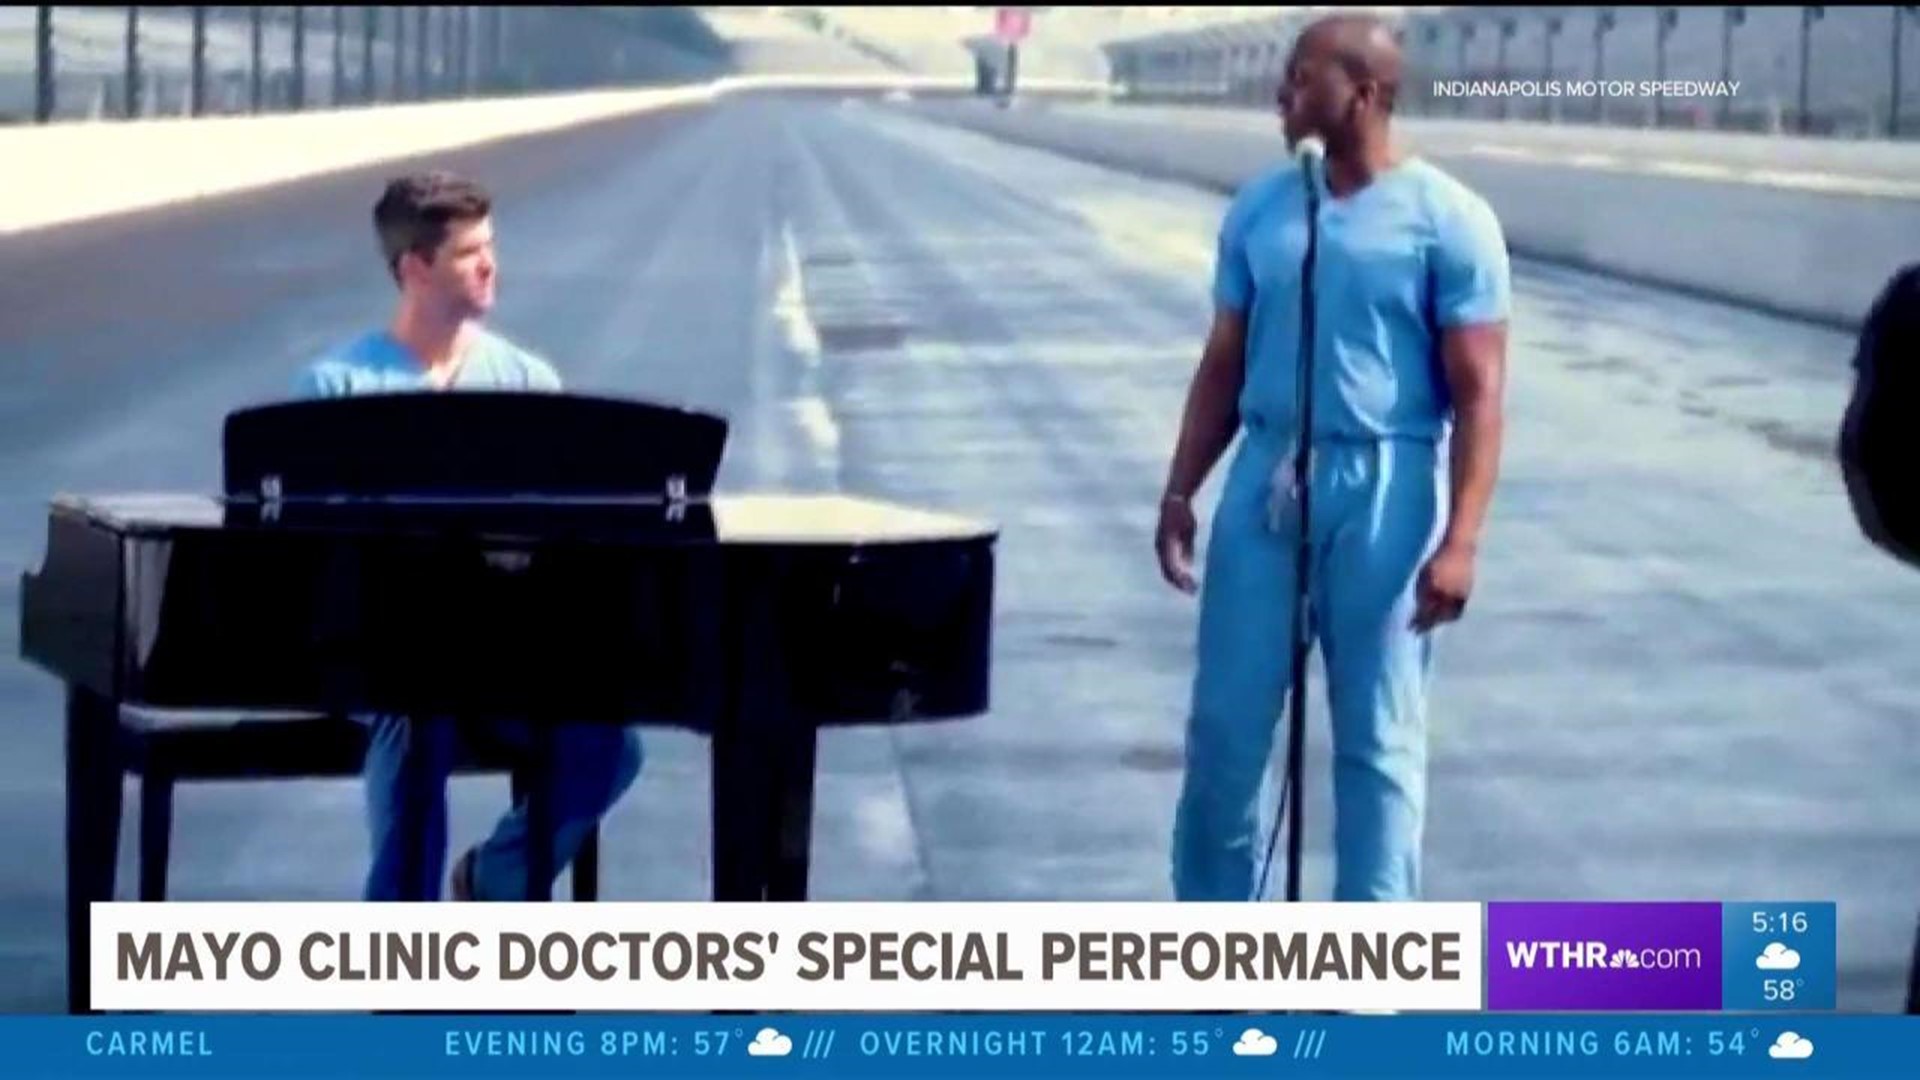 Mayo Clinic doctors' special performance